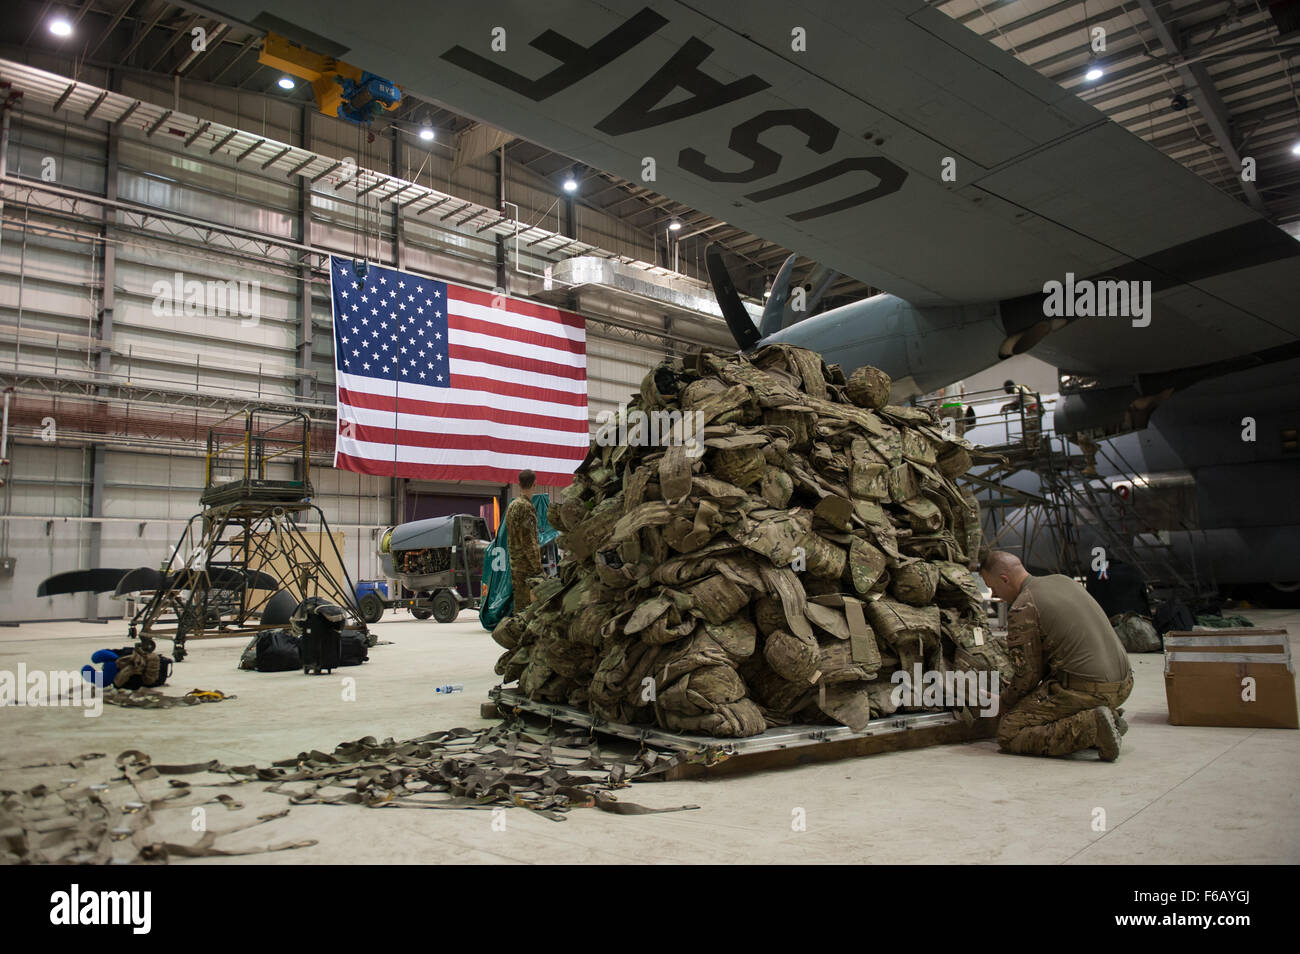 A U.S. Airman assigned to the 774th Expeditionary Airlift Squadron prepares a pallet before it is loaded onto a C-130J Super Hercules aircraft at Bagram Air Field, Afghanistan, Sept. 12, 2015. The Airman and the rest of his squadron were in the process of redeploying back to Little Rock Air Force Base after successfully completing their deployment. During their rotation as the 774th Expeditionary Airlift Squadron, the Little Rock team completed 1,850 combat sorties and moved 14,500 passengers and 17 million pounds of cargo.  (U.S. Air Force photo by Tech. Sgt. Joseph Swafford/Released) Stock Photo